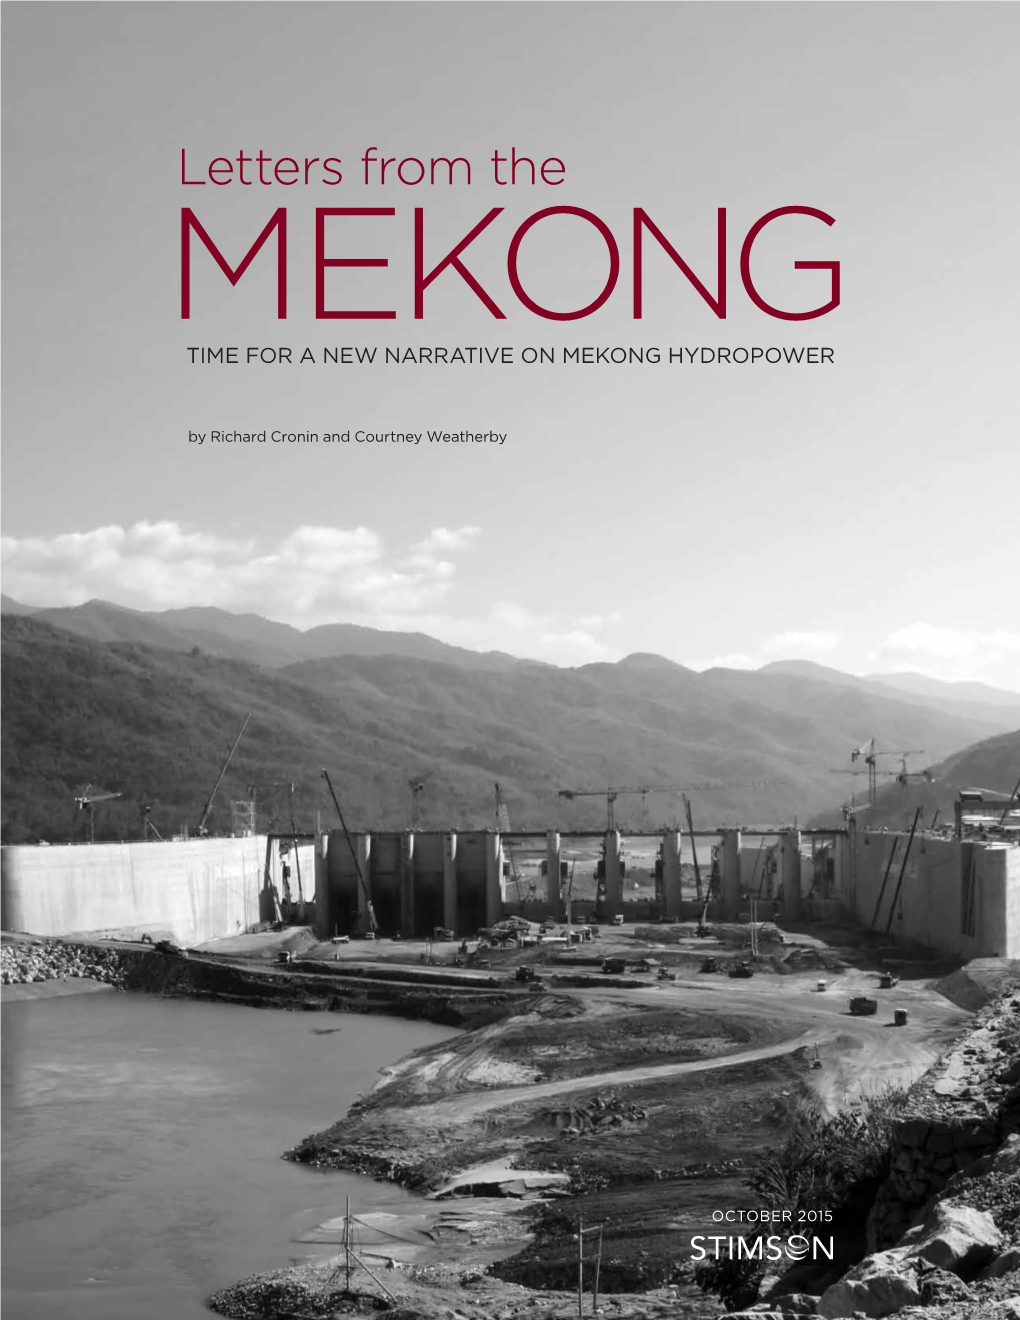 Letters from the MEKONG TIME for a NEW NARRATIVE on MEKONG HYDROPOWER